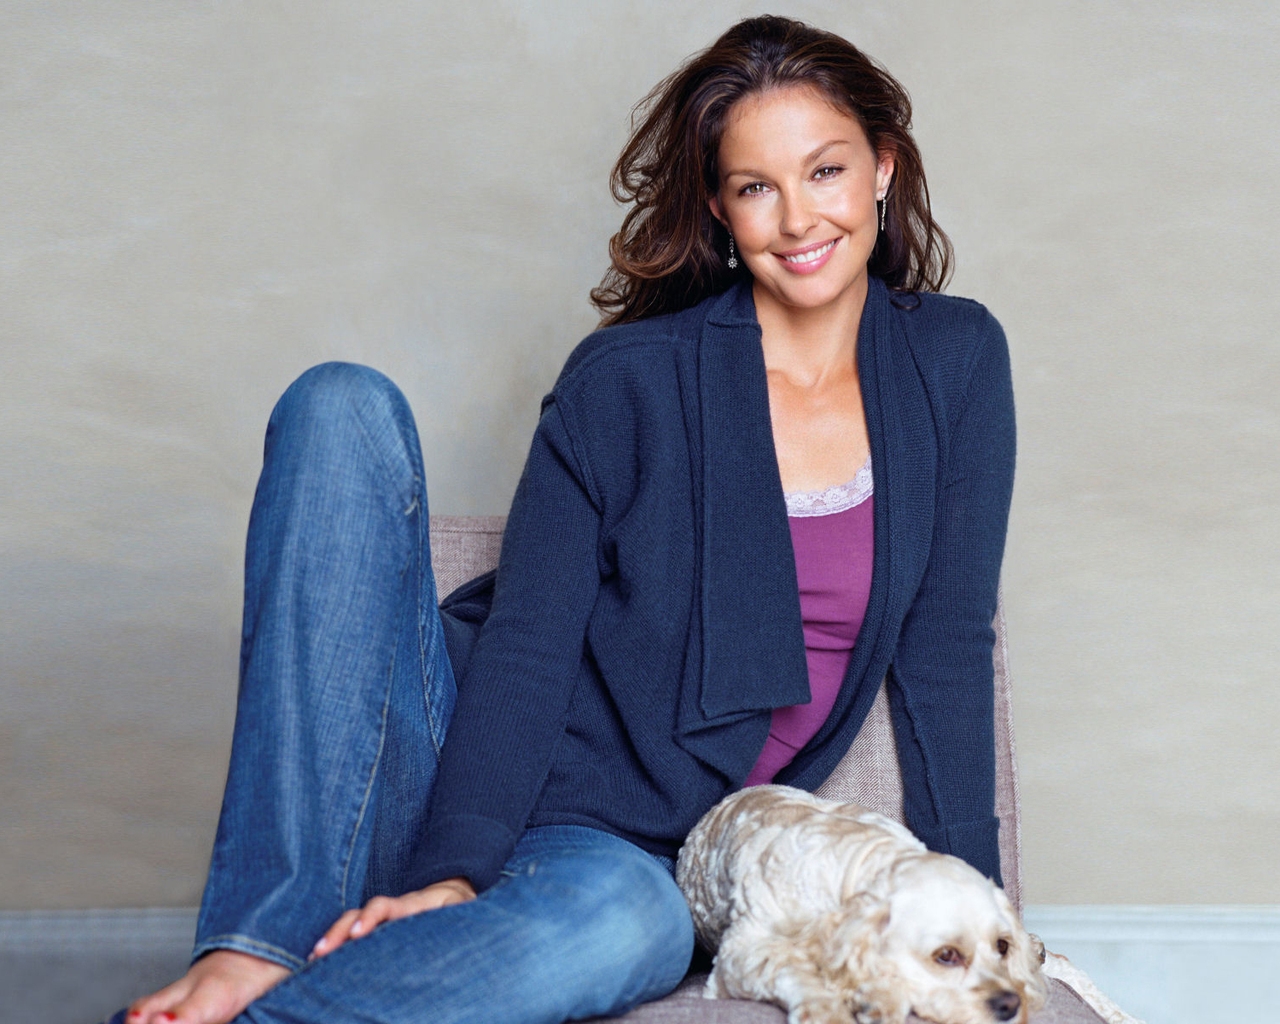 Ashley Judd Smile for 1280 x 1024 resolution